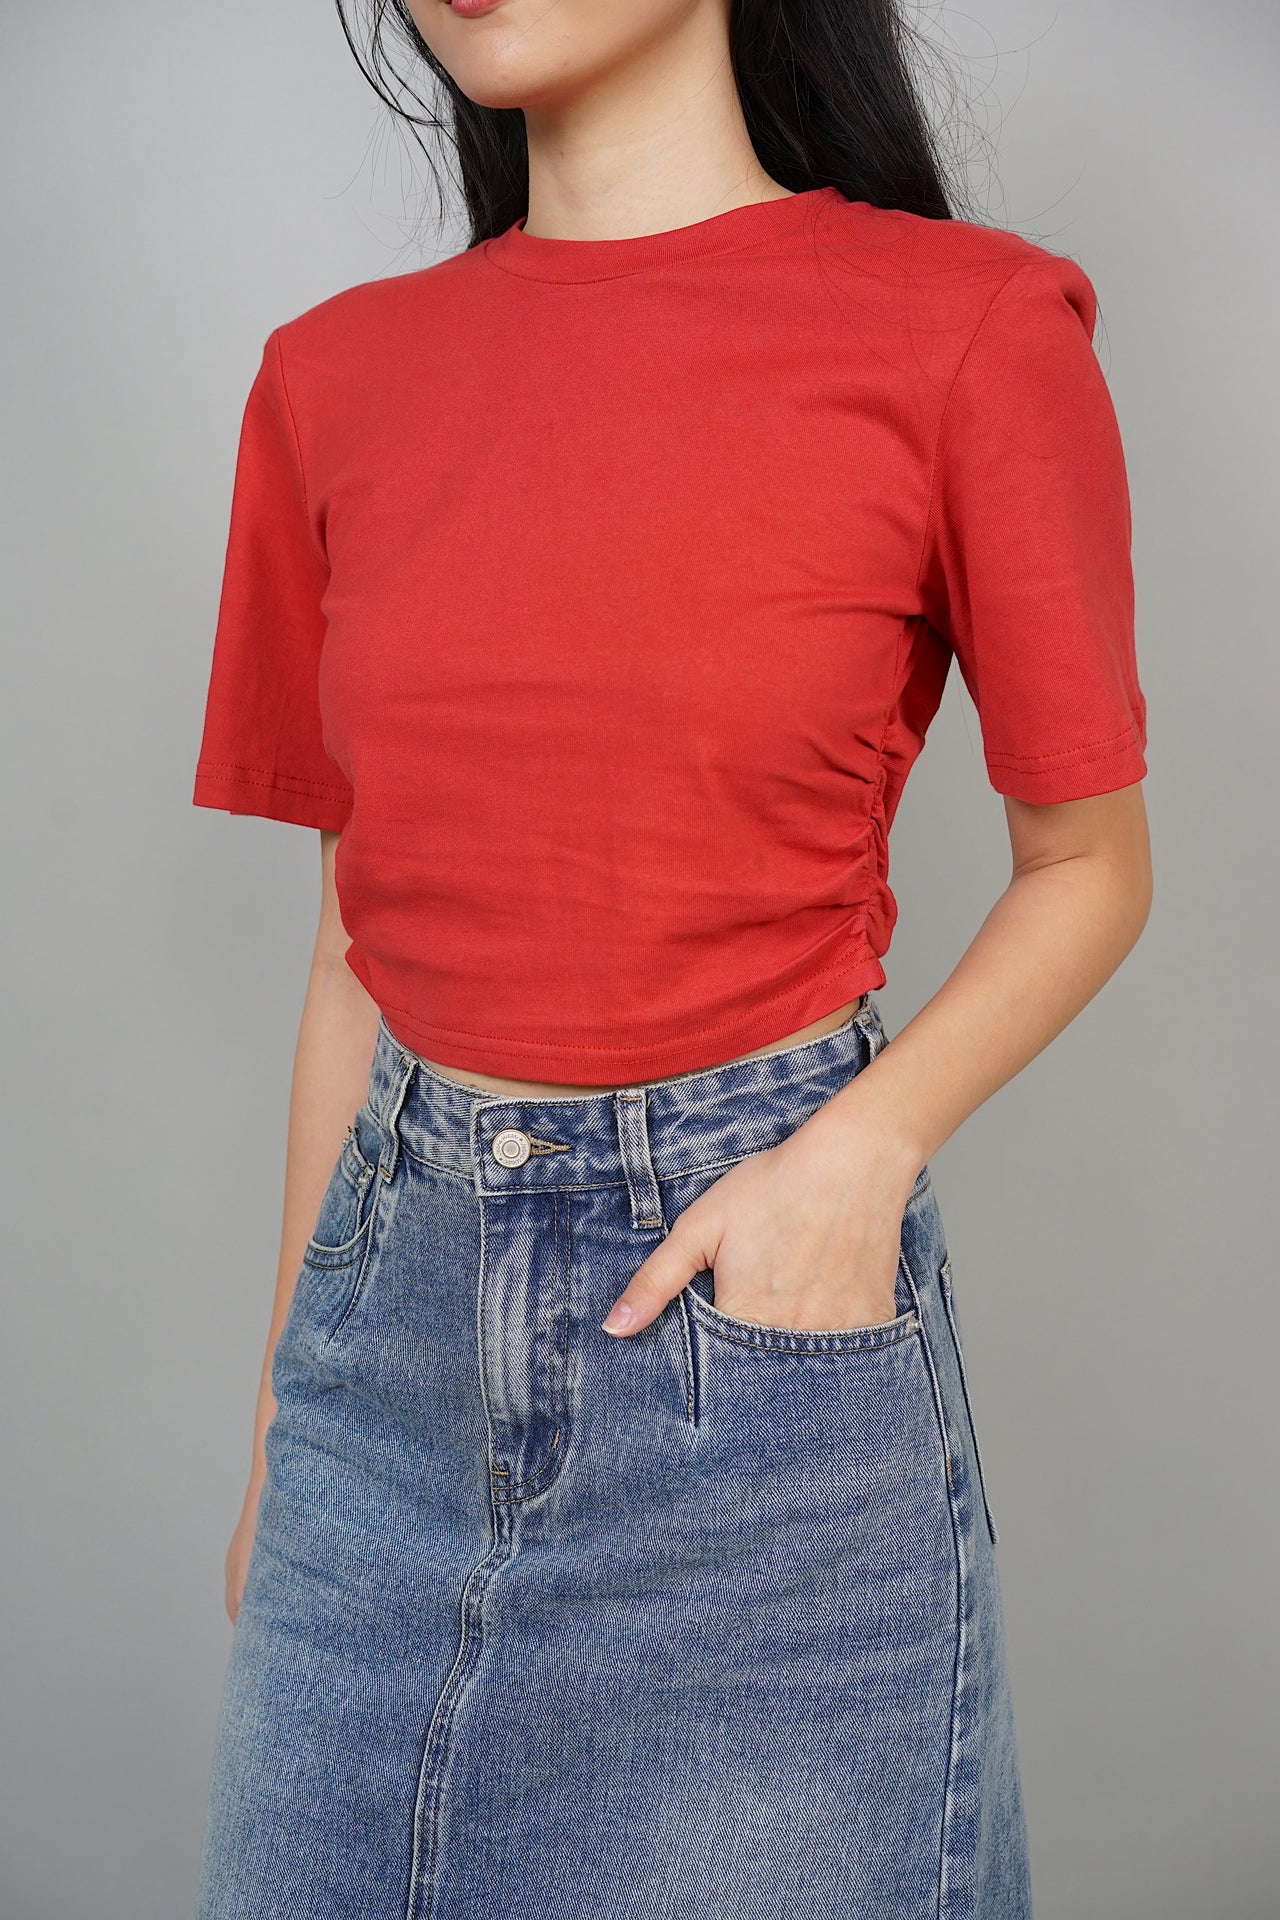 Ellecia Side Gathered Top in Berry Red